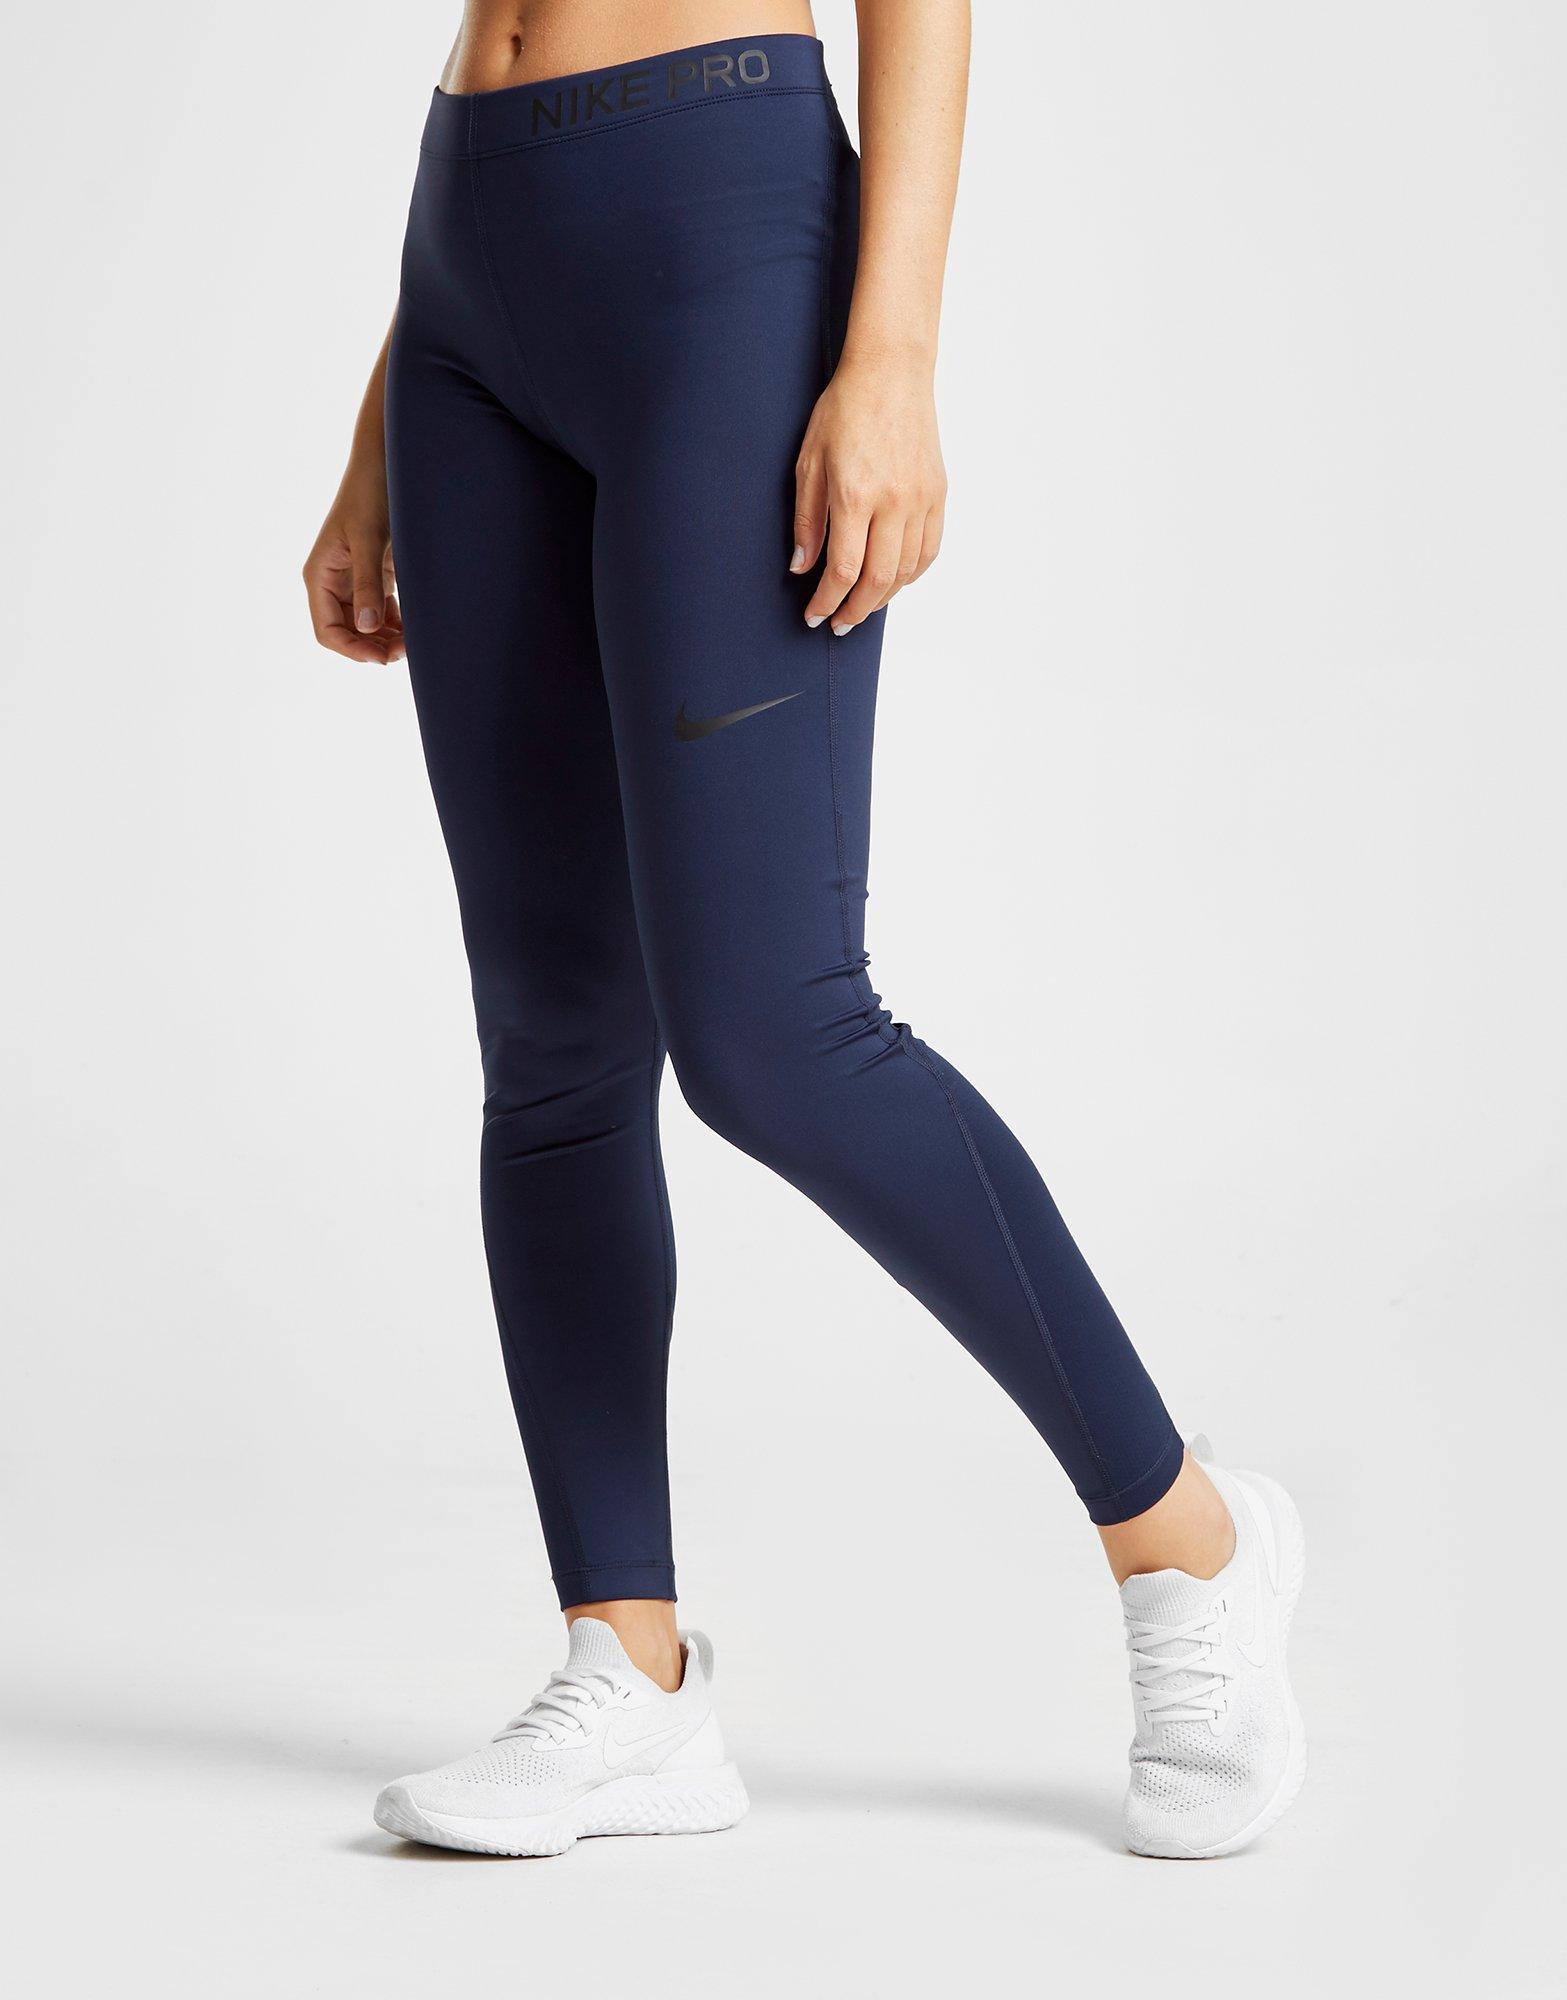 nike pro training leggings in navy with rose gold waistband